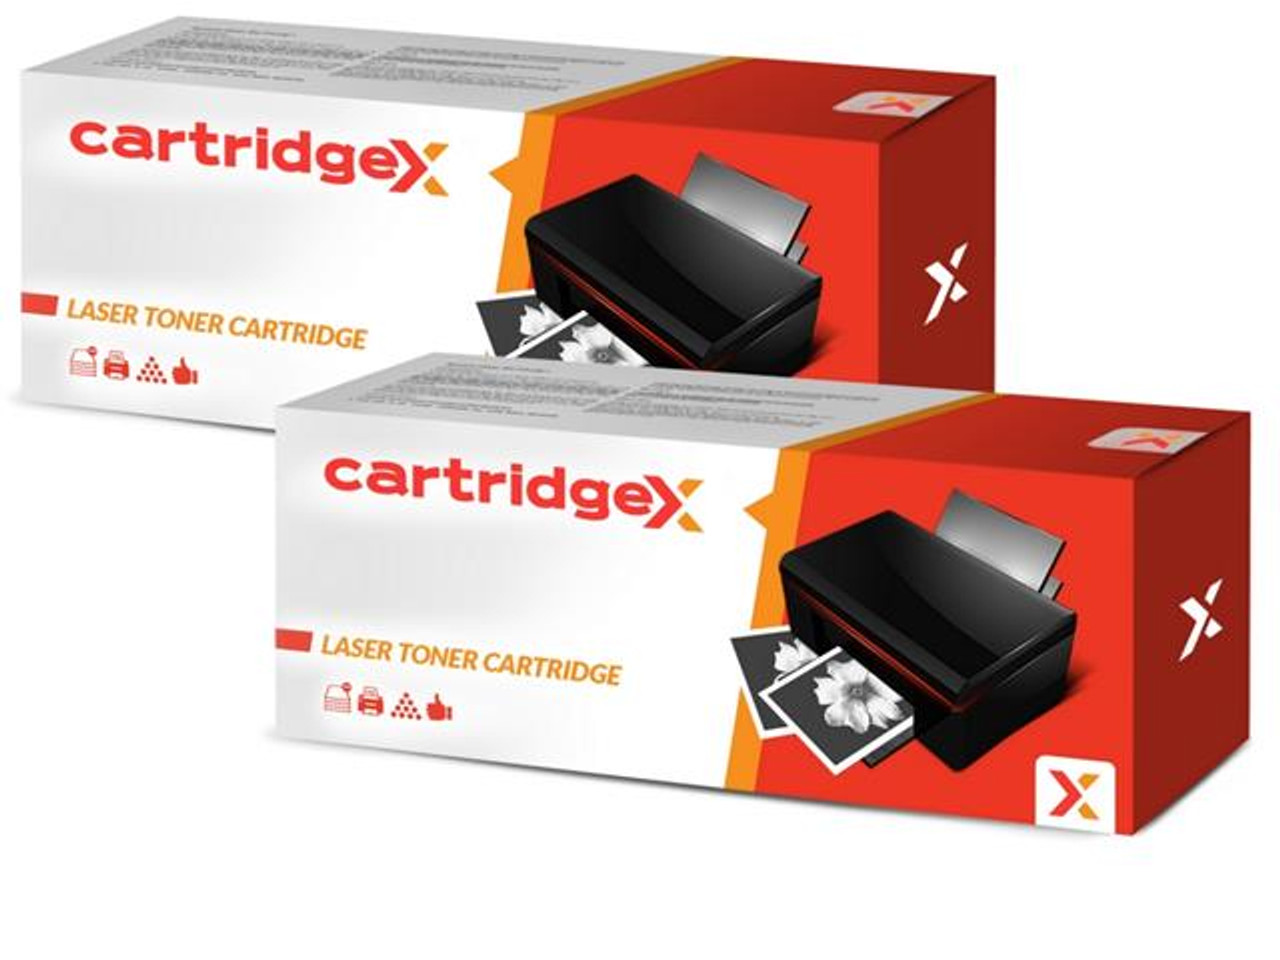 Compatible 2 X Laser Toner For Hp Q7551a 51a P3005 P3005d P3005n P3005dn P3005x P3005dtn